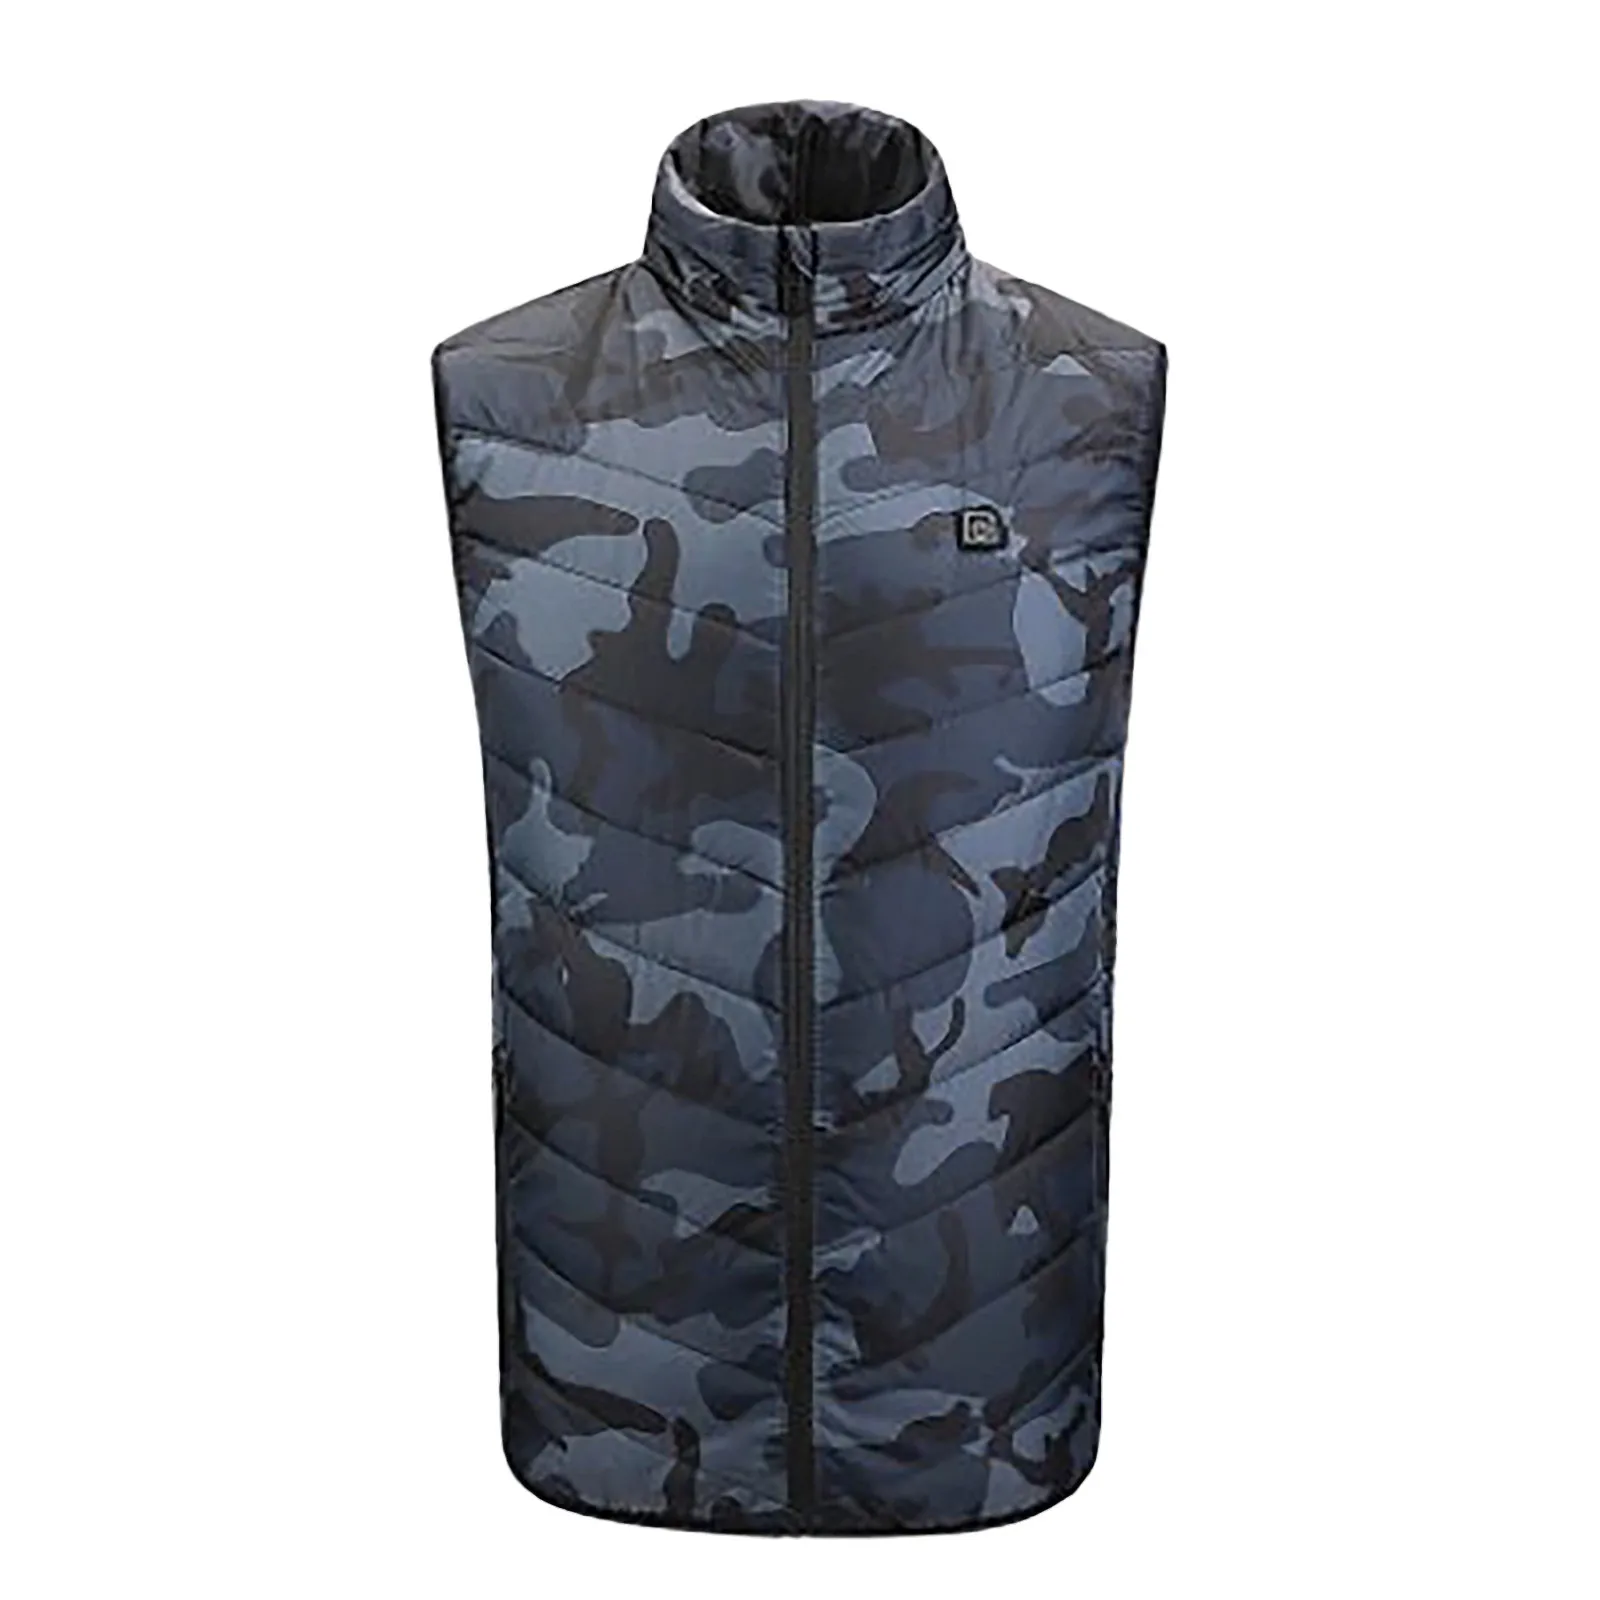 Sporting Outdoor Warm Clothing Heated For Riding Skiing Fishing Charging Via Hea - £38.36 GBP